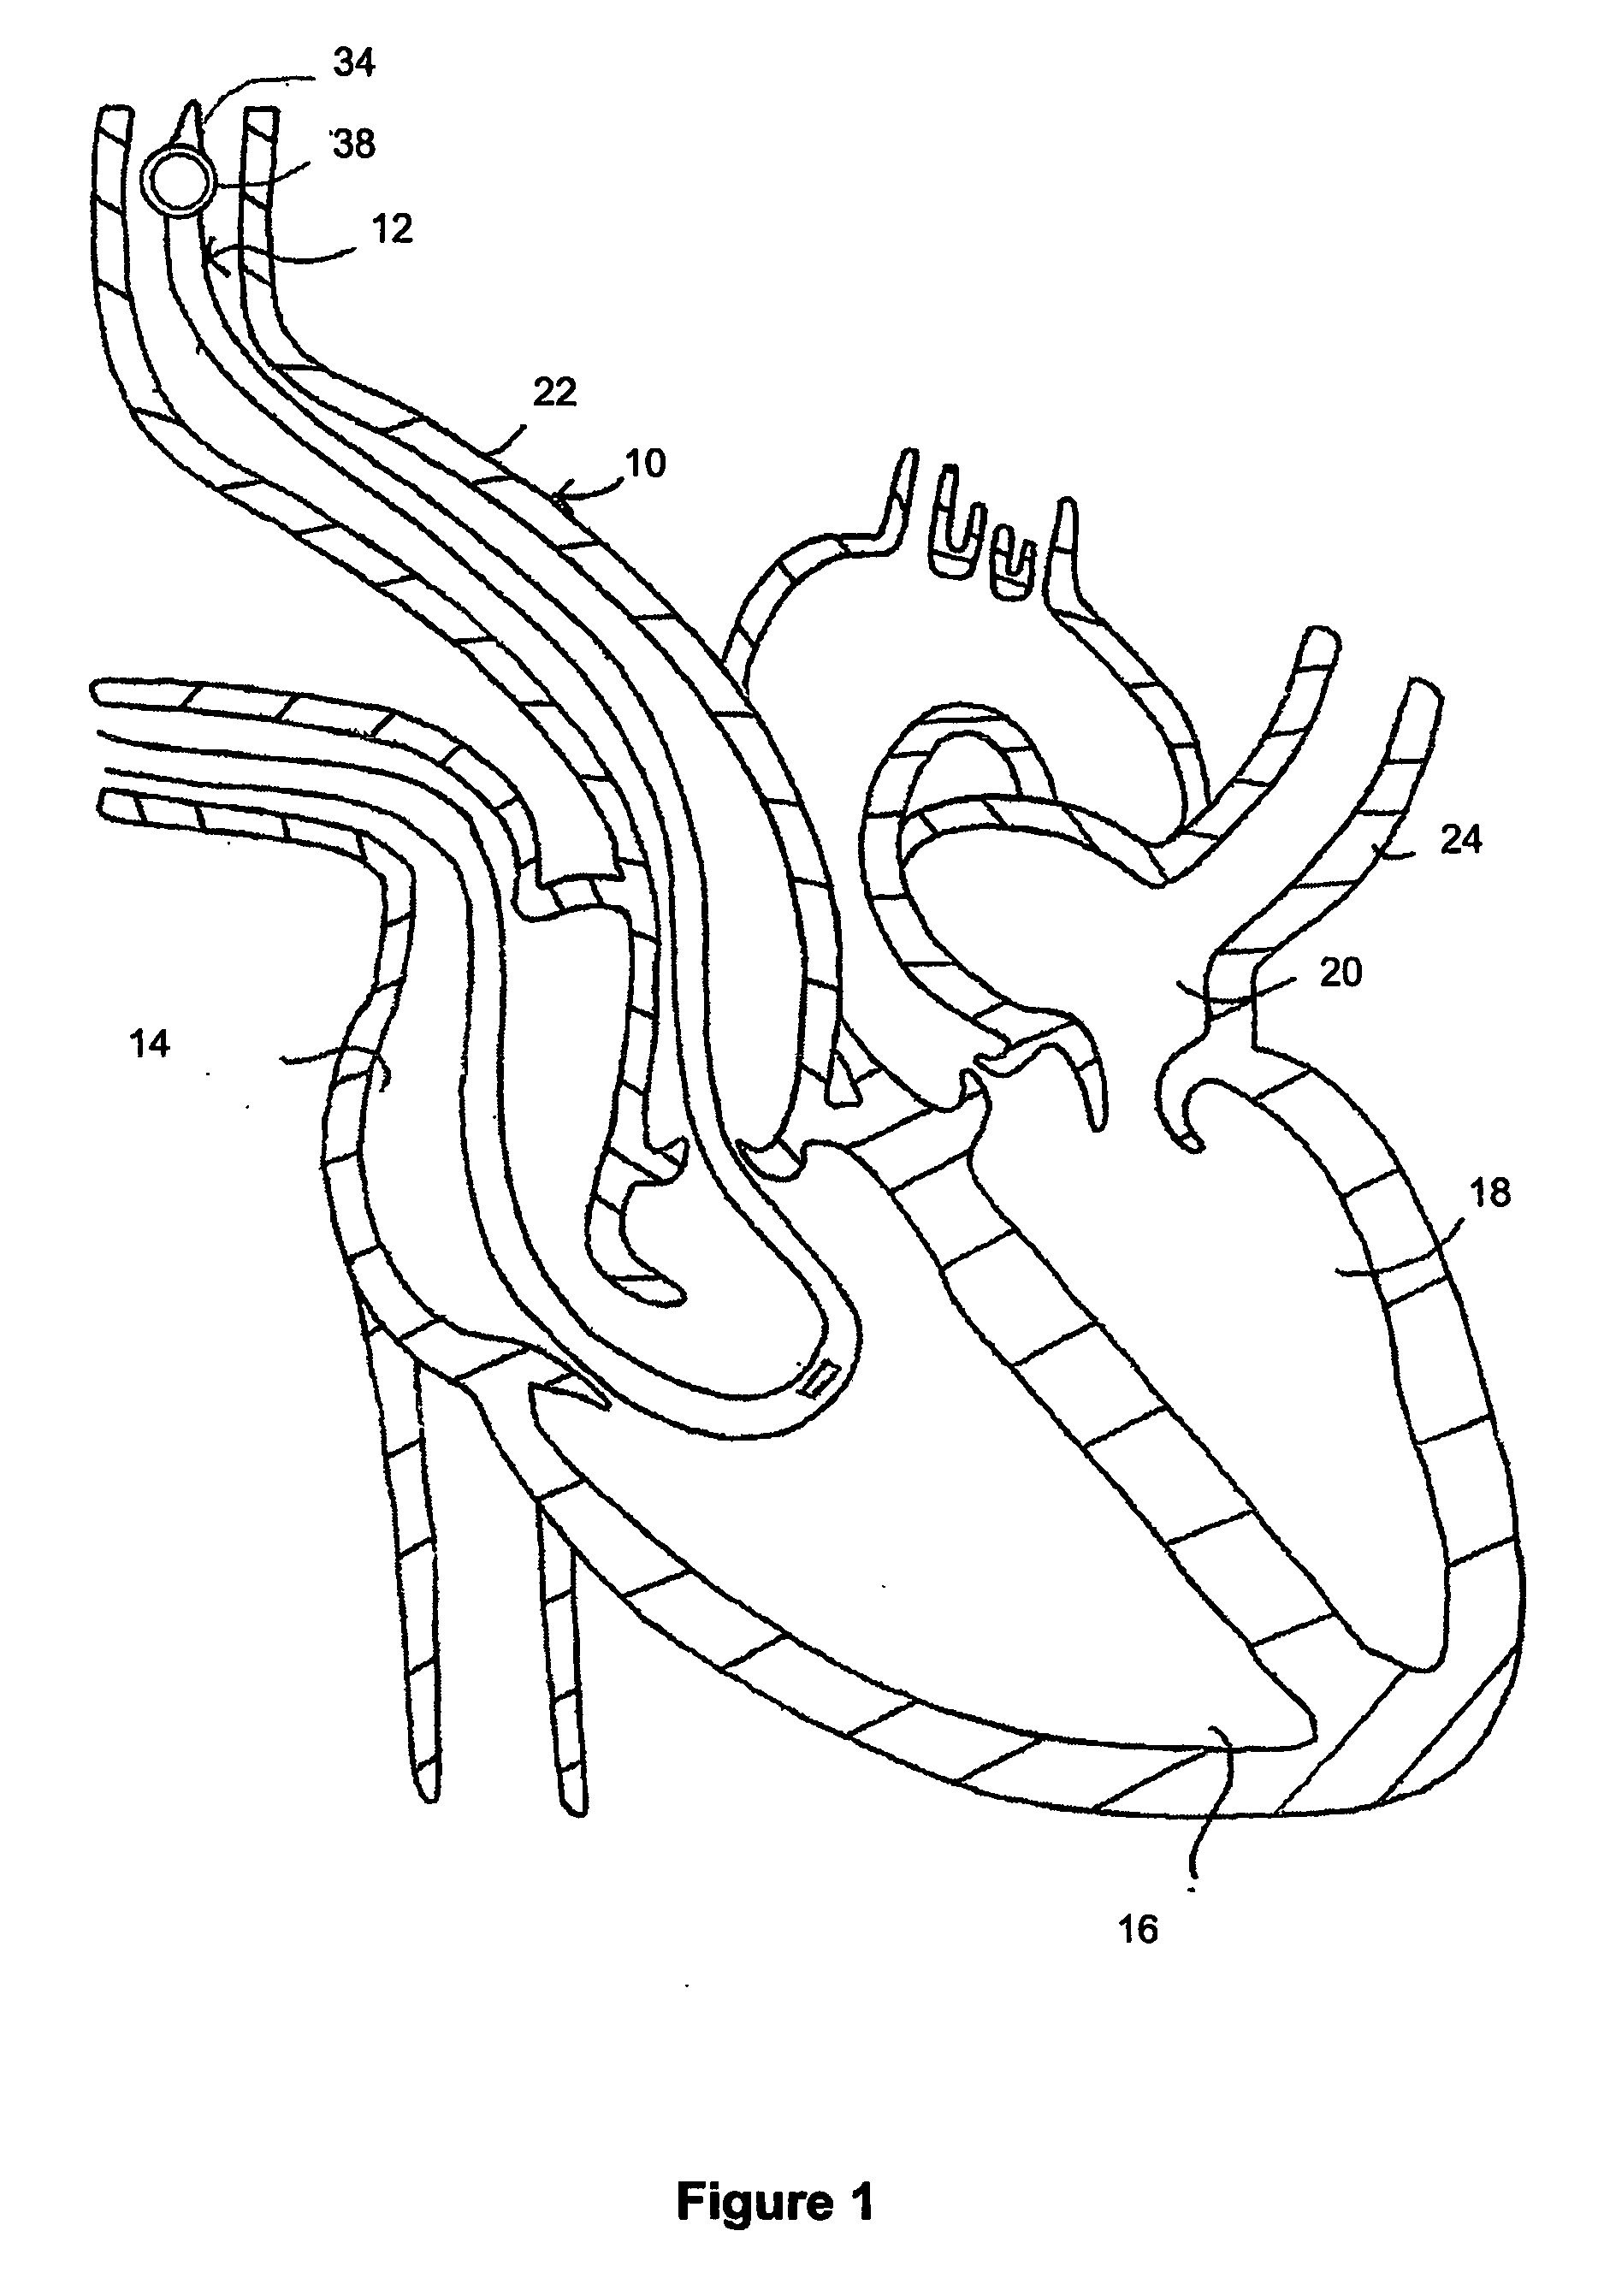 Catherter for measuring an intraventricular pressure and method of using same